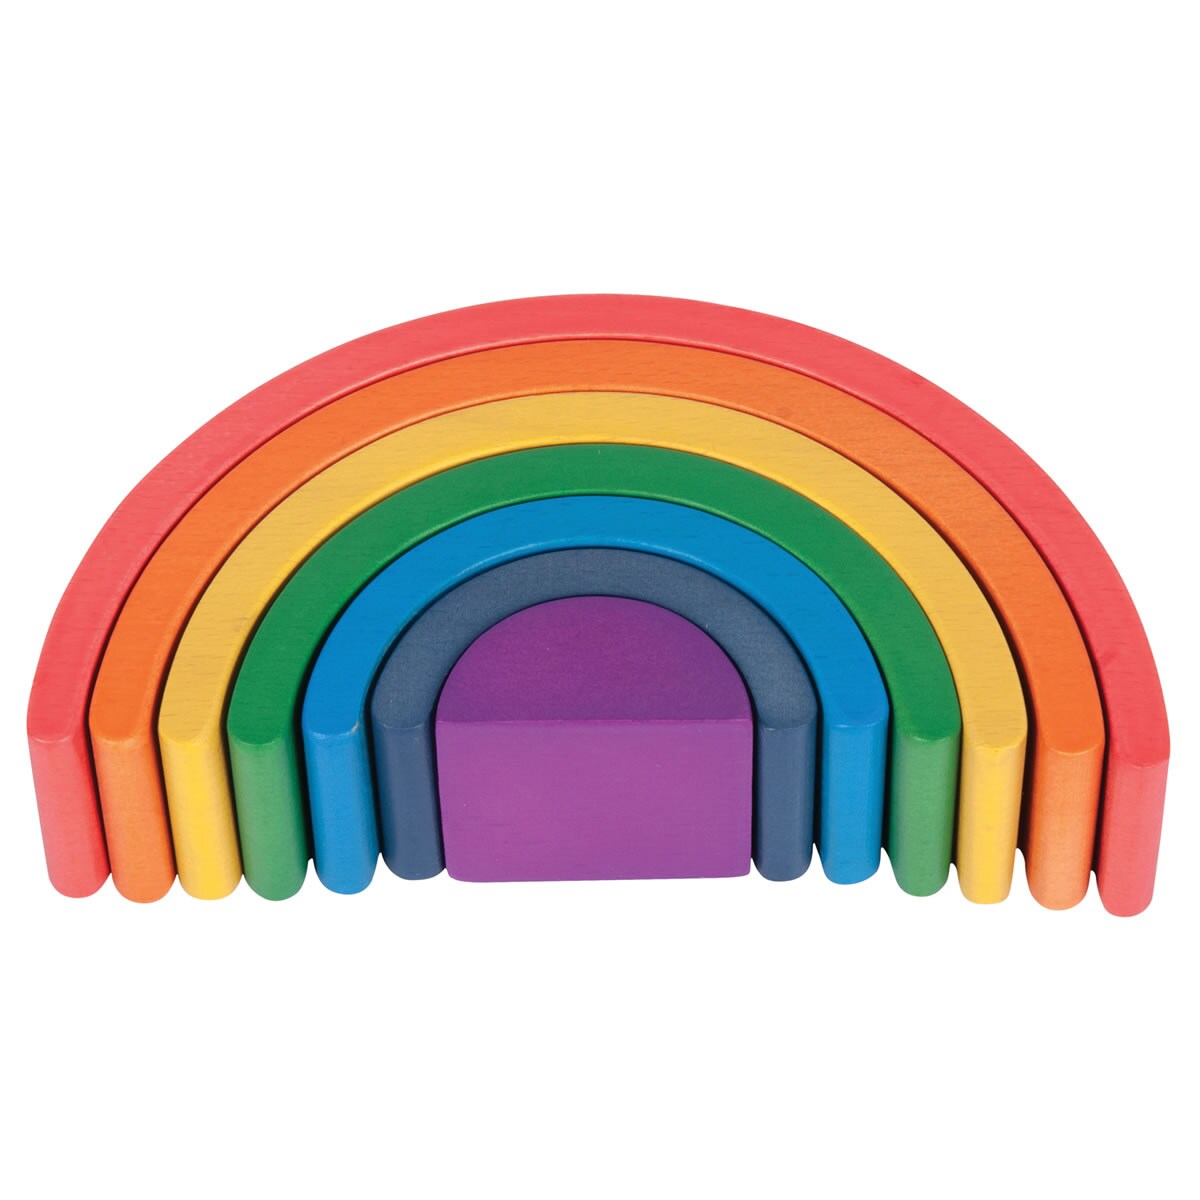 TickiT TickiT Rainbow Architect Arches - 7 Pieces